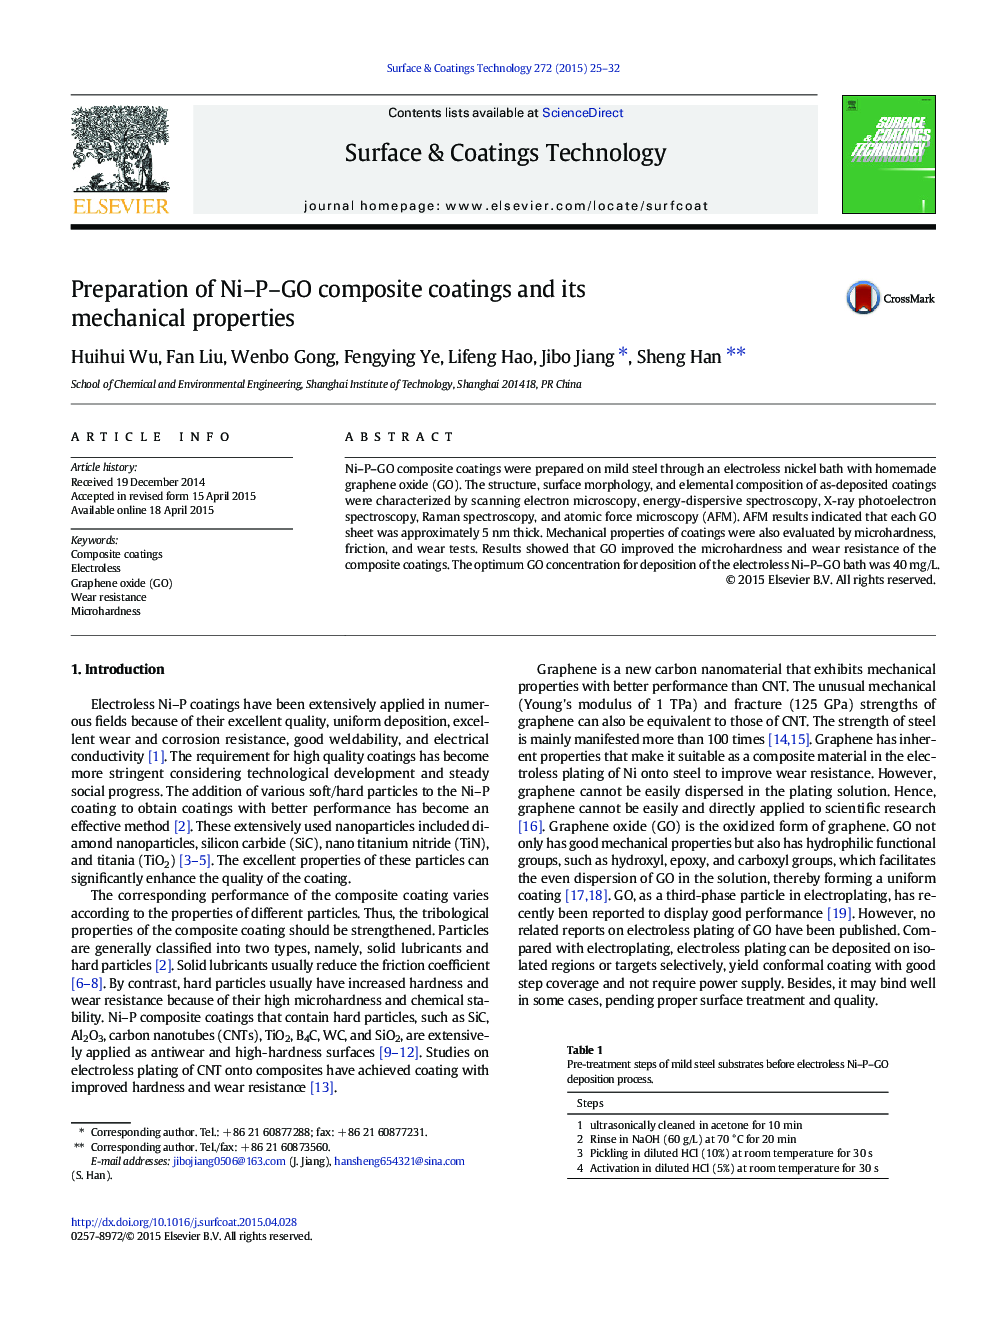 Preparation of Ni-P-GO composite coatings and its mechanical properties